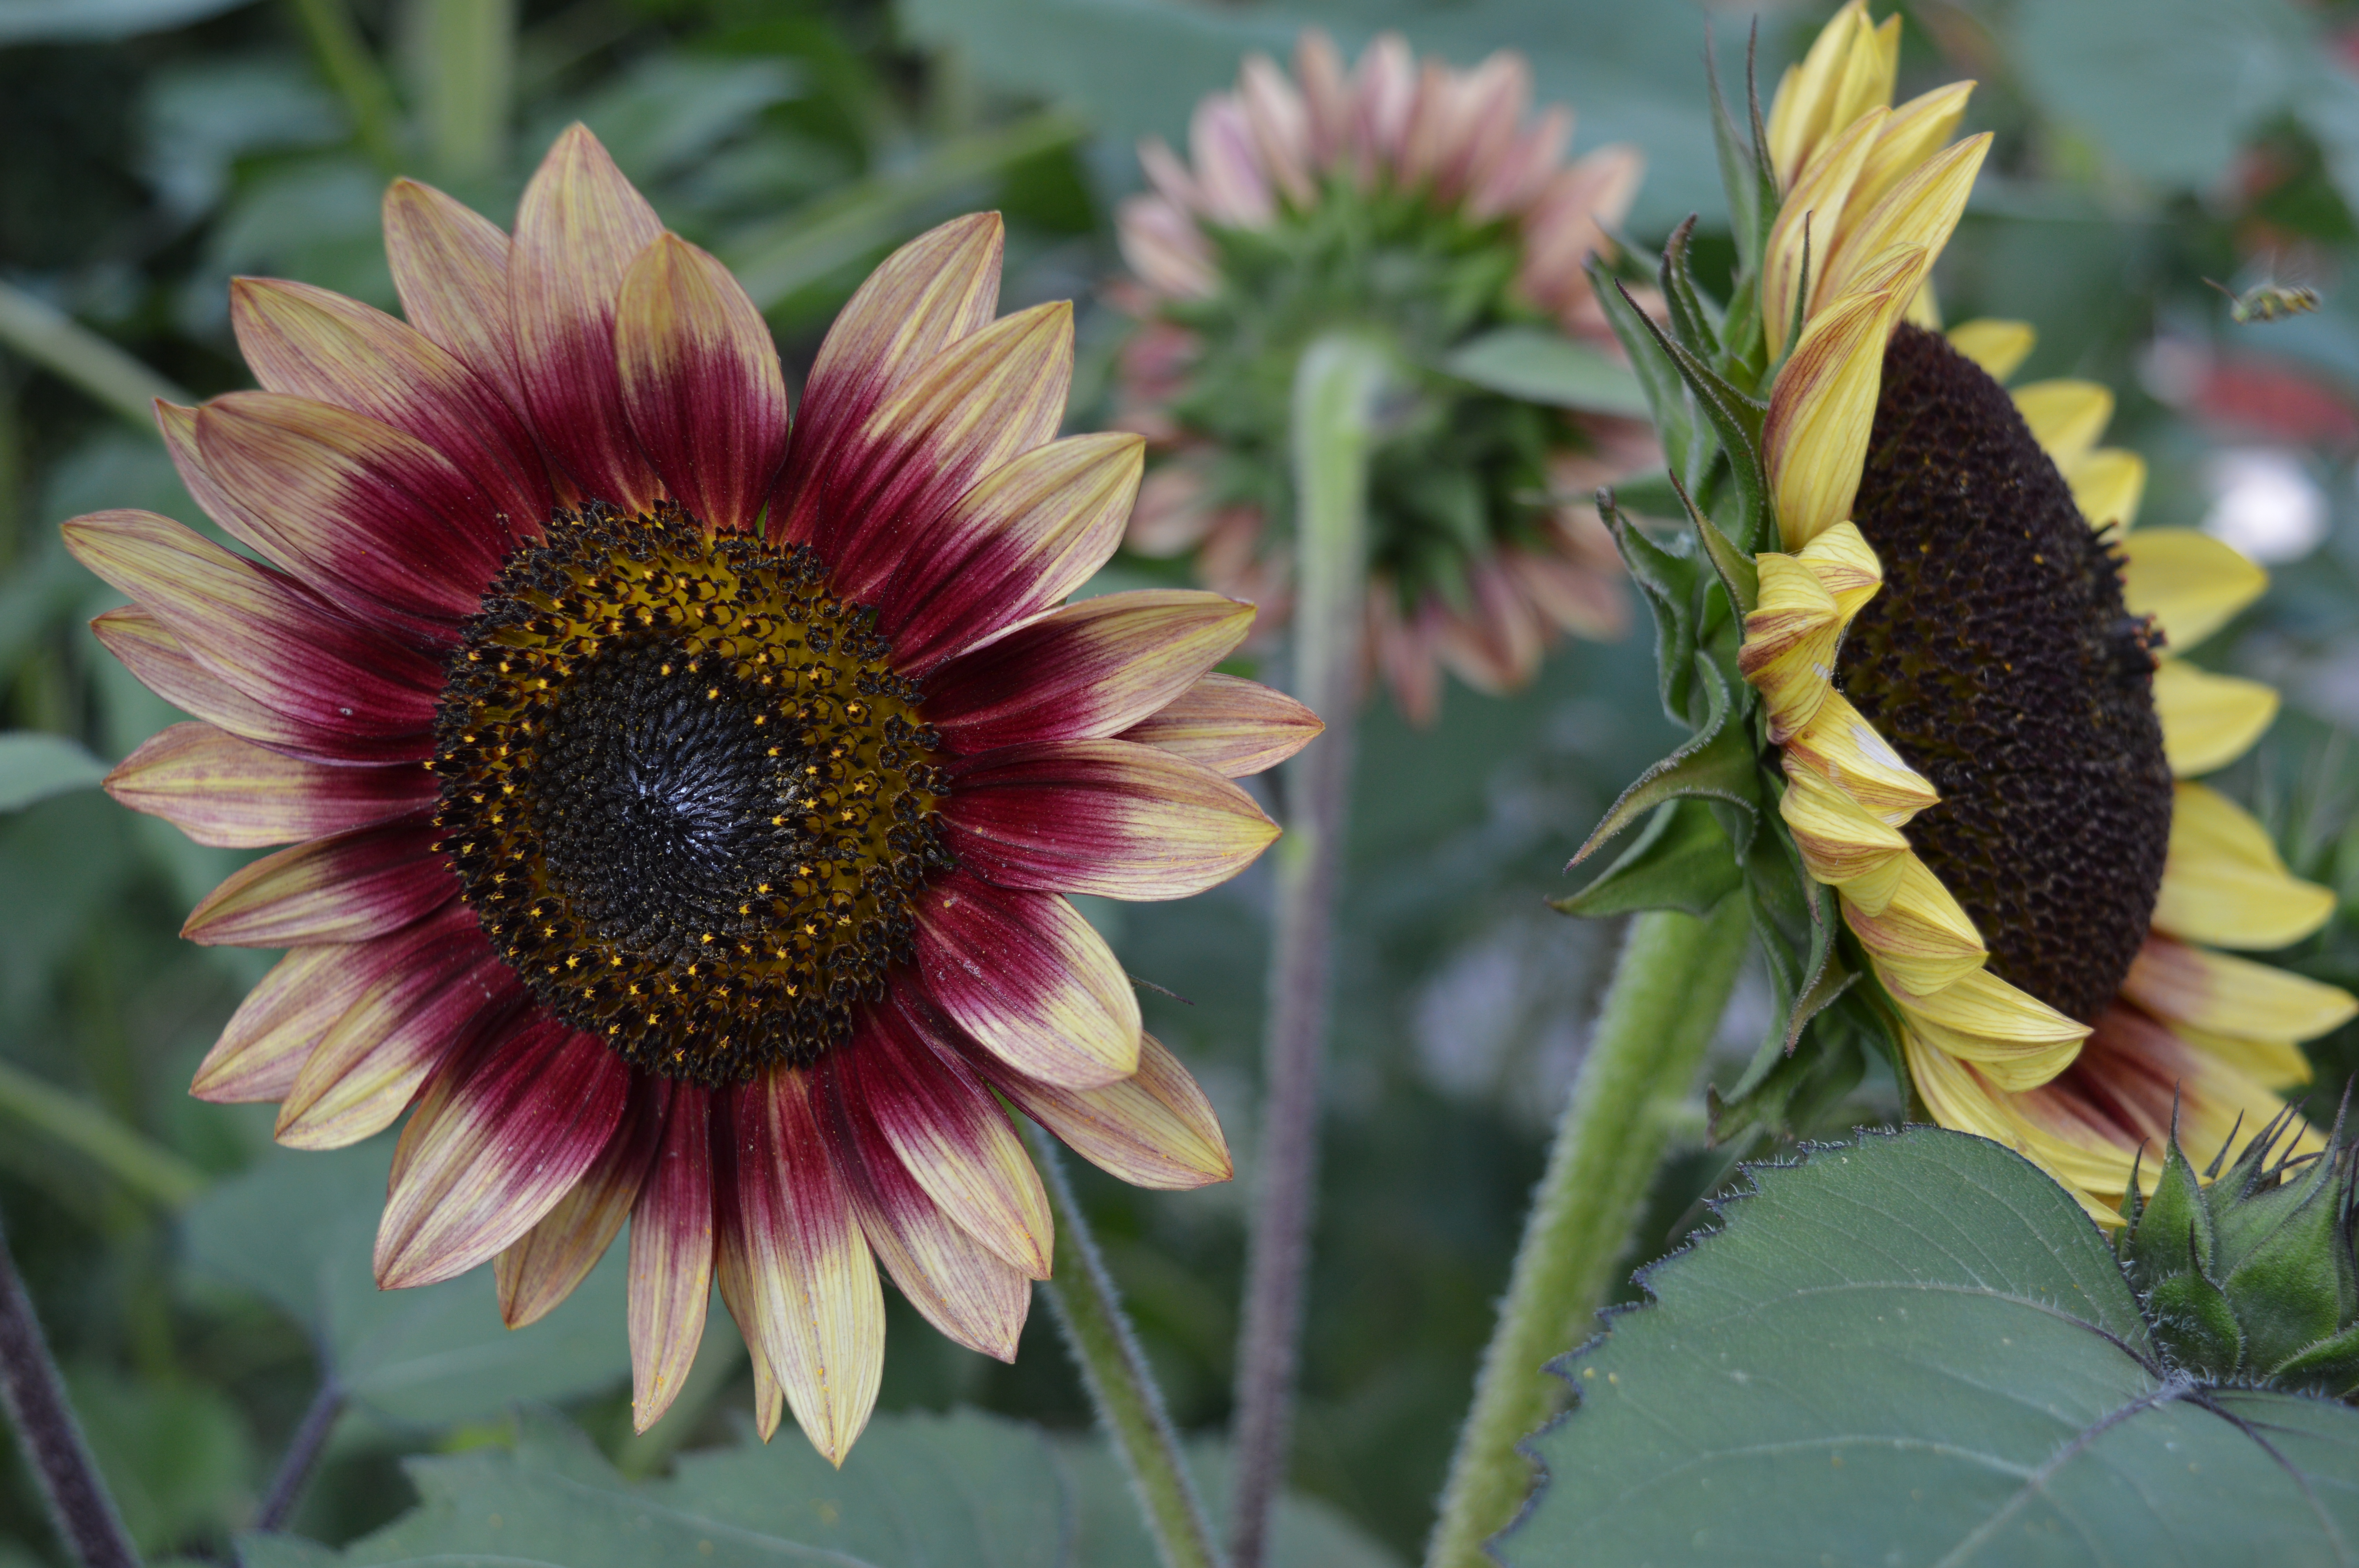 Sun worshipers 21 things you didn't know about sunflowers   lab ...